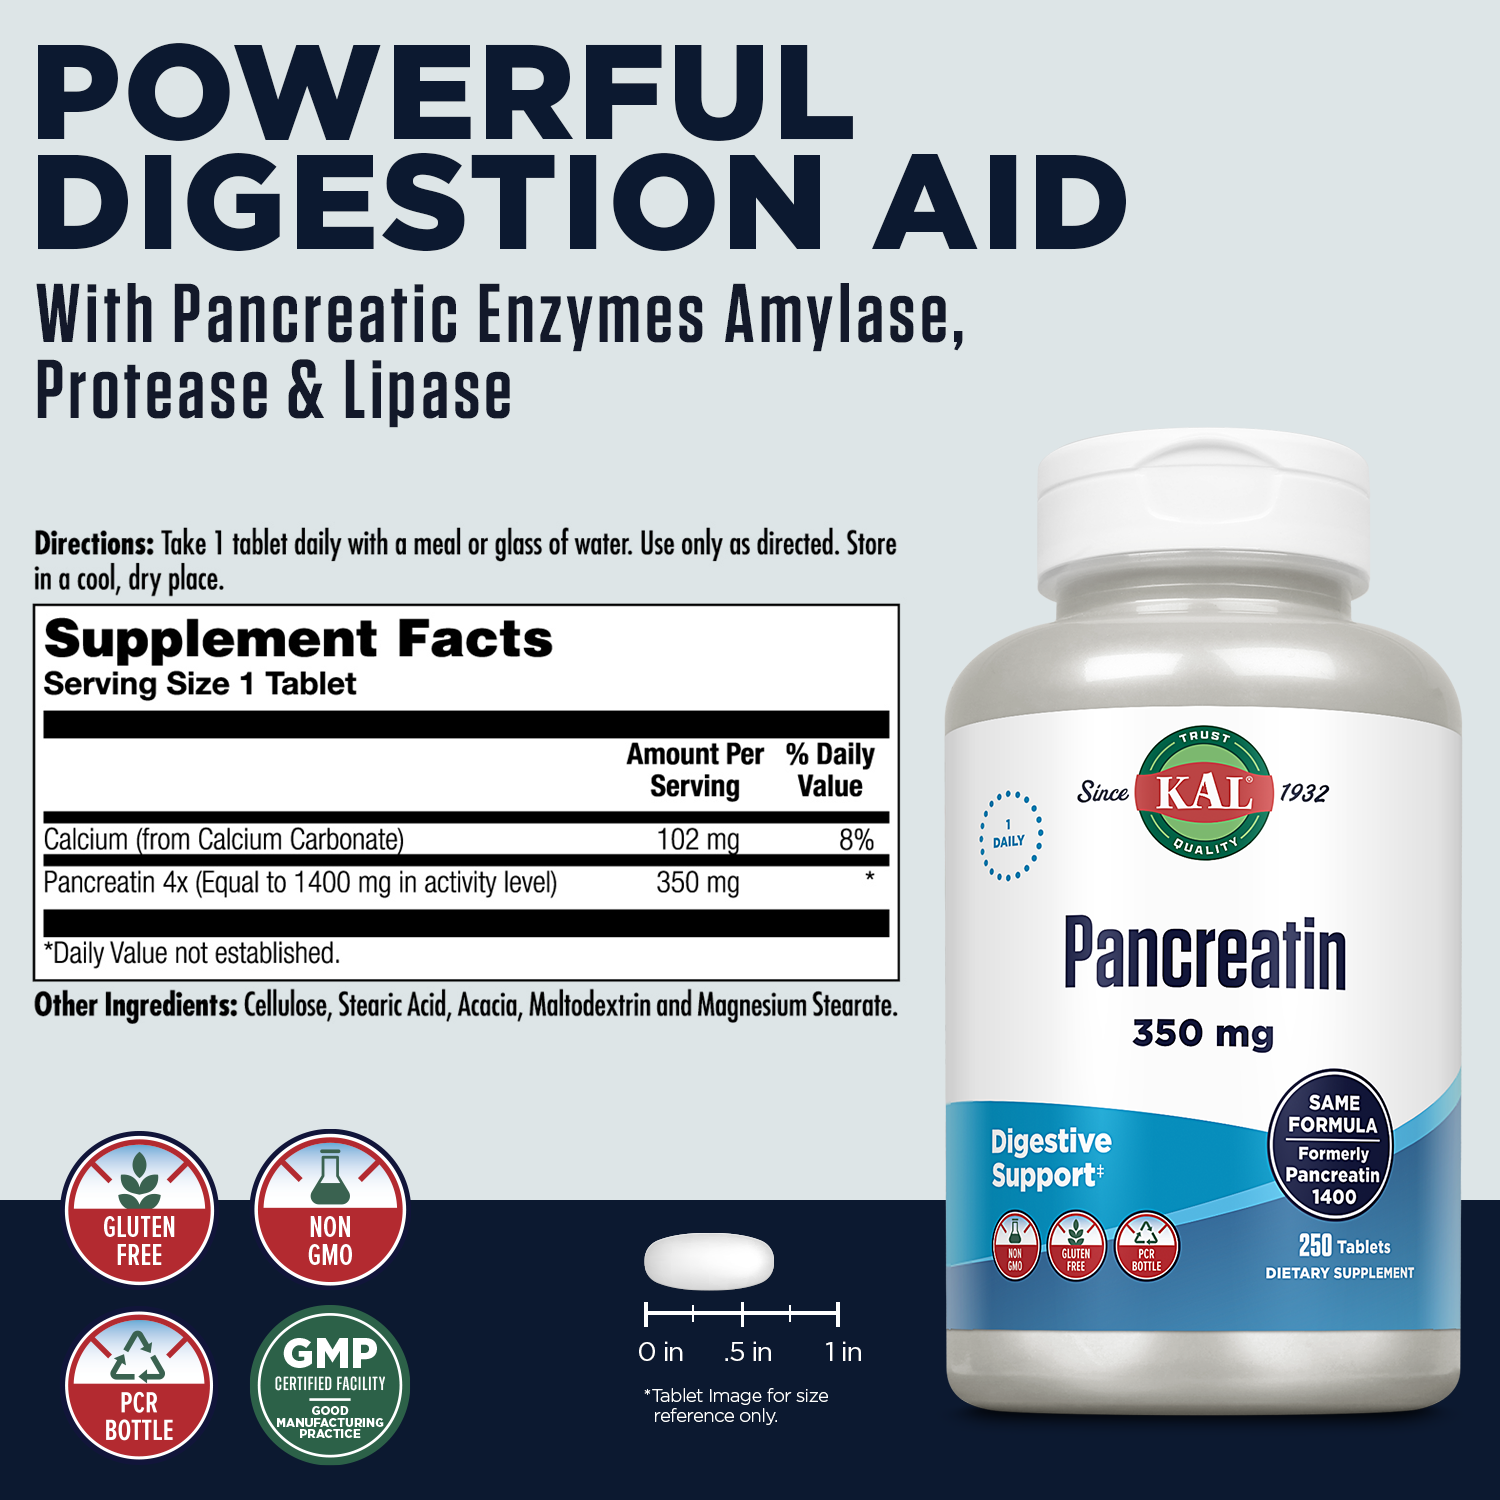 KAL Pancreatin 1400 | Pancreatic Enzymes Amylase, Protease & Lipase to Help Support Healthy Digestion of Carbs, Fats & Proteins | 250 Tablets - image 2 of 7